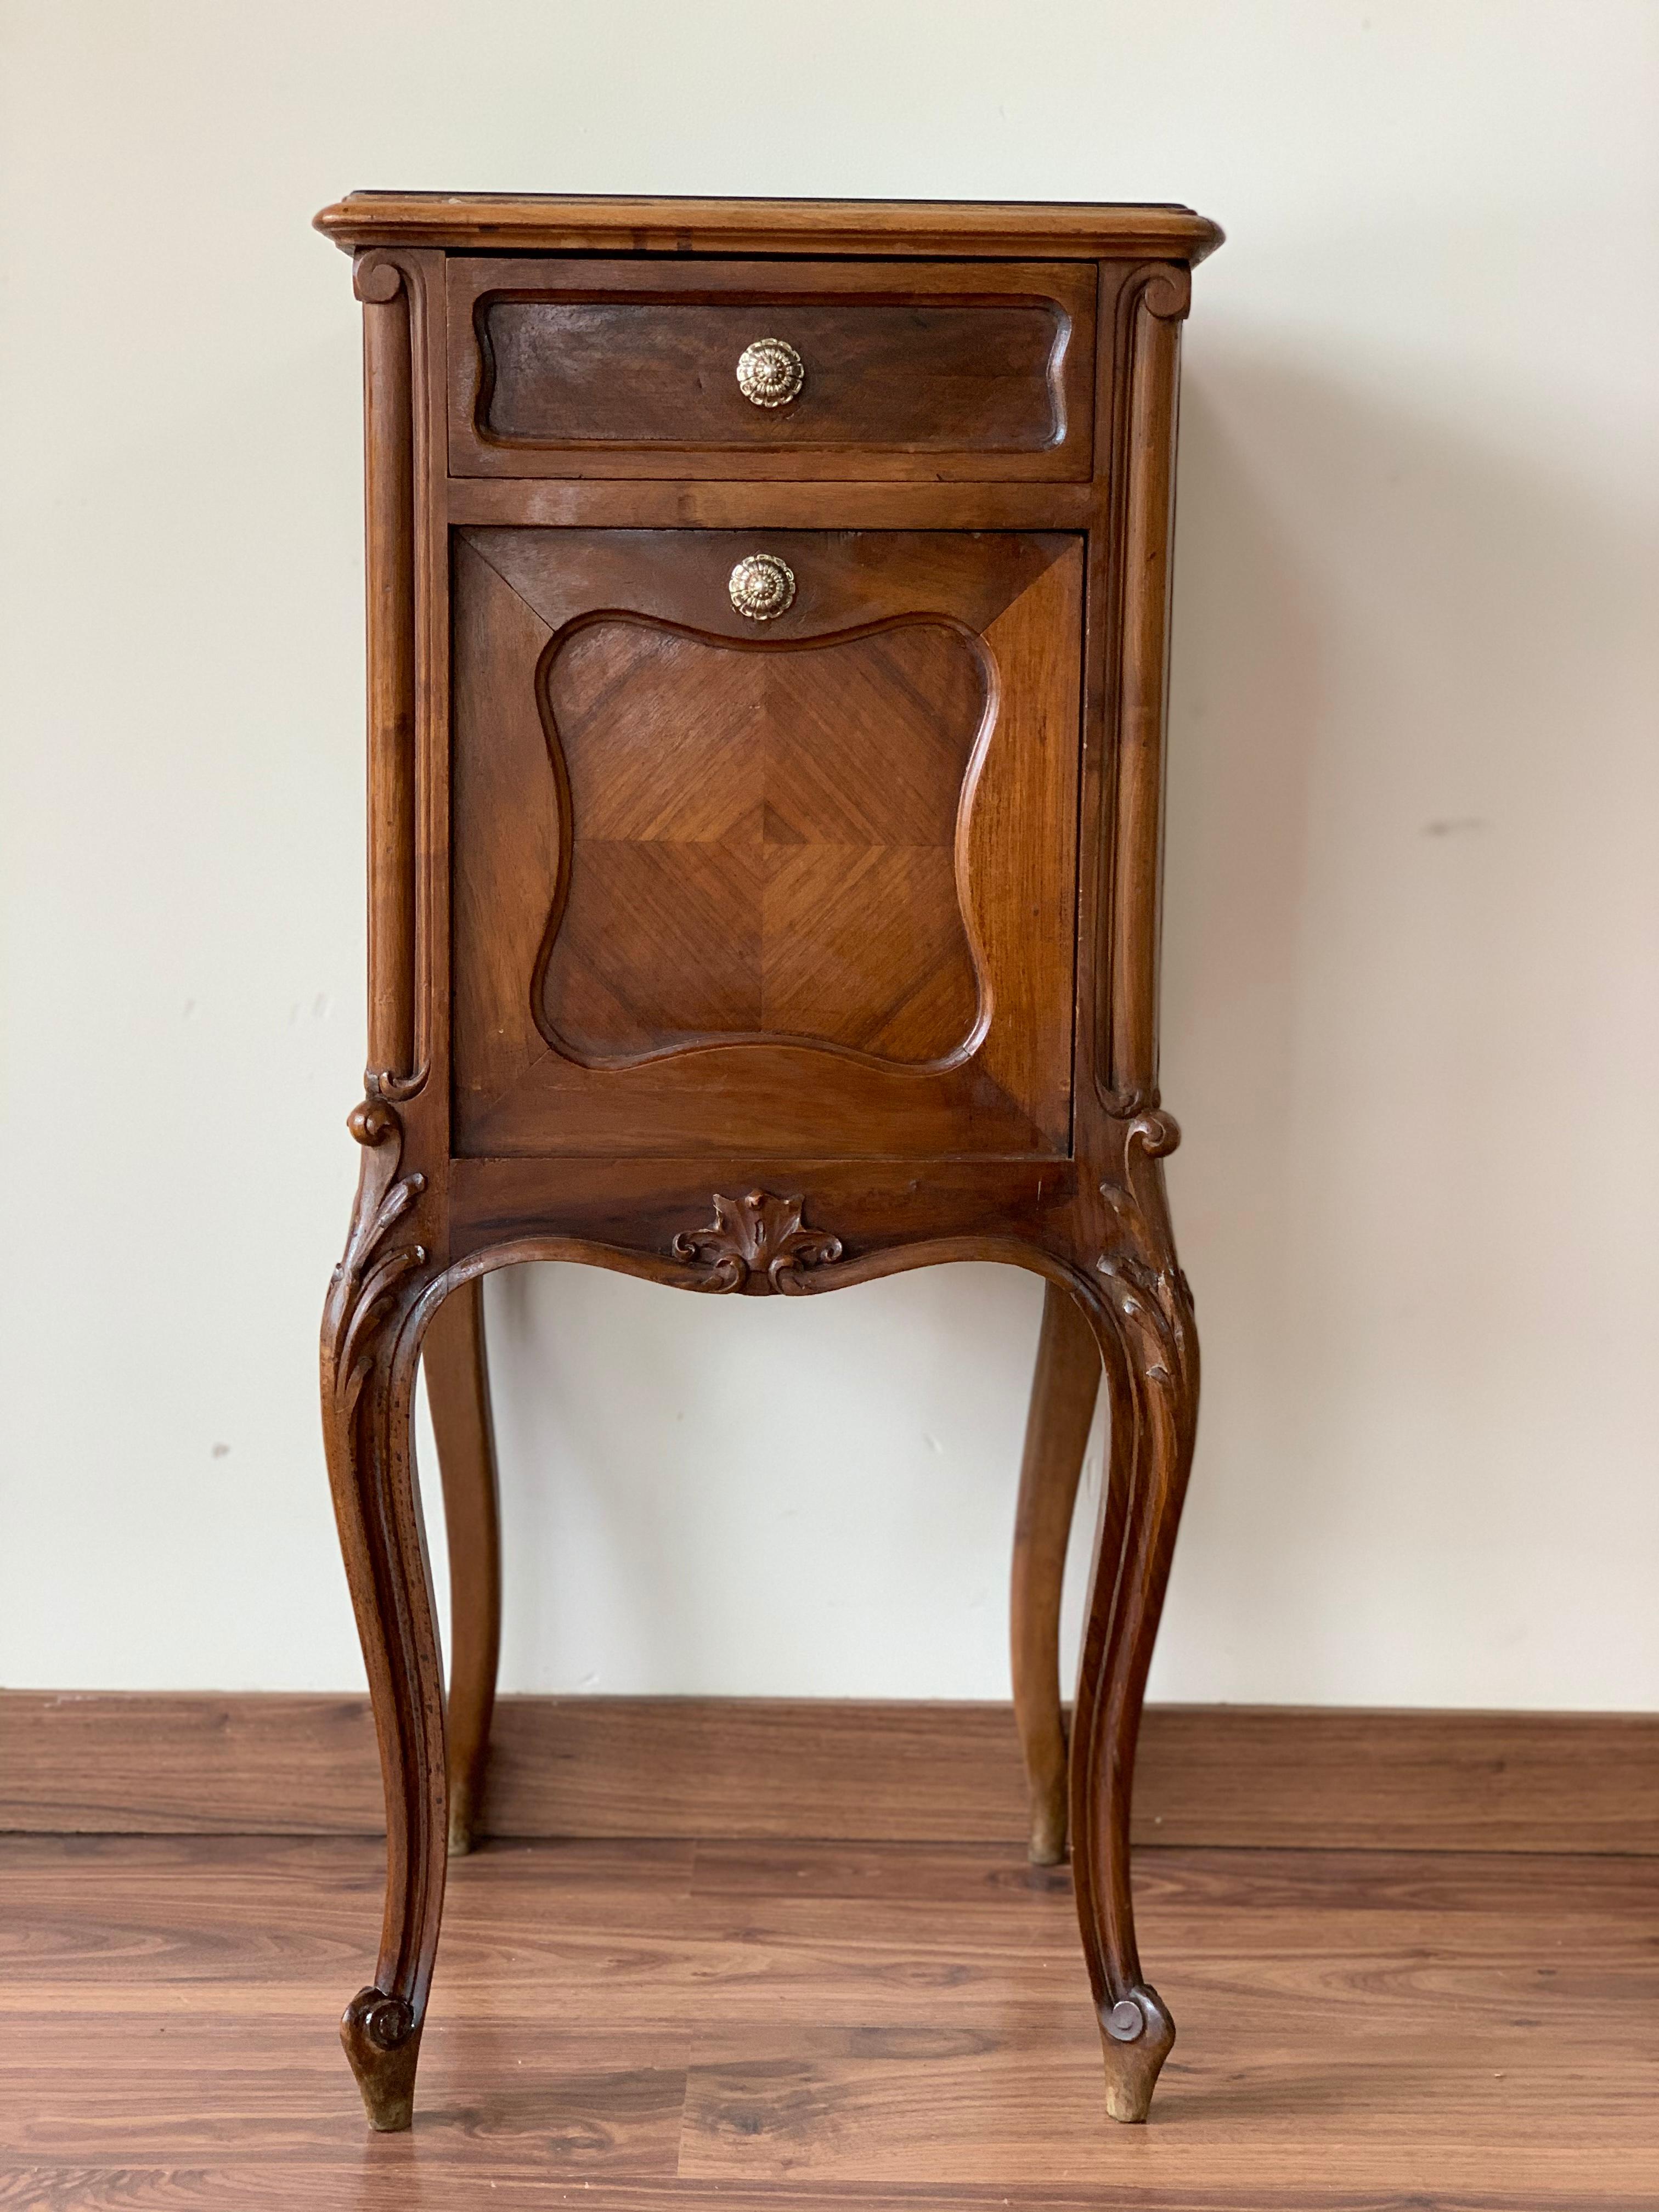 19th century pair of Louis XV carved nightstand with one drawer and black glass top. The nightstands have one drawer and fronts fold down to reveal a storage compartments with marble base.